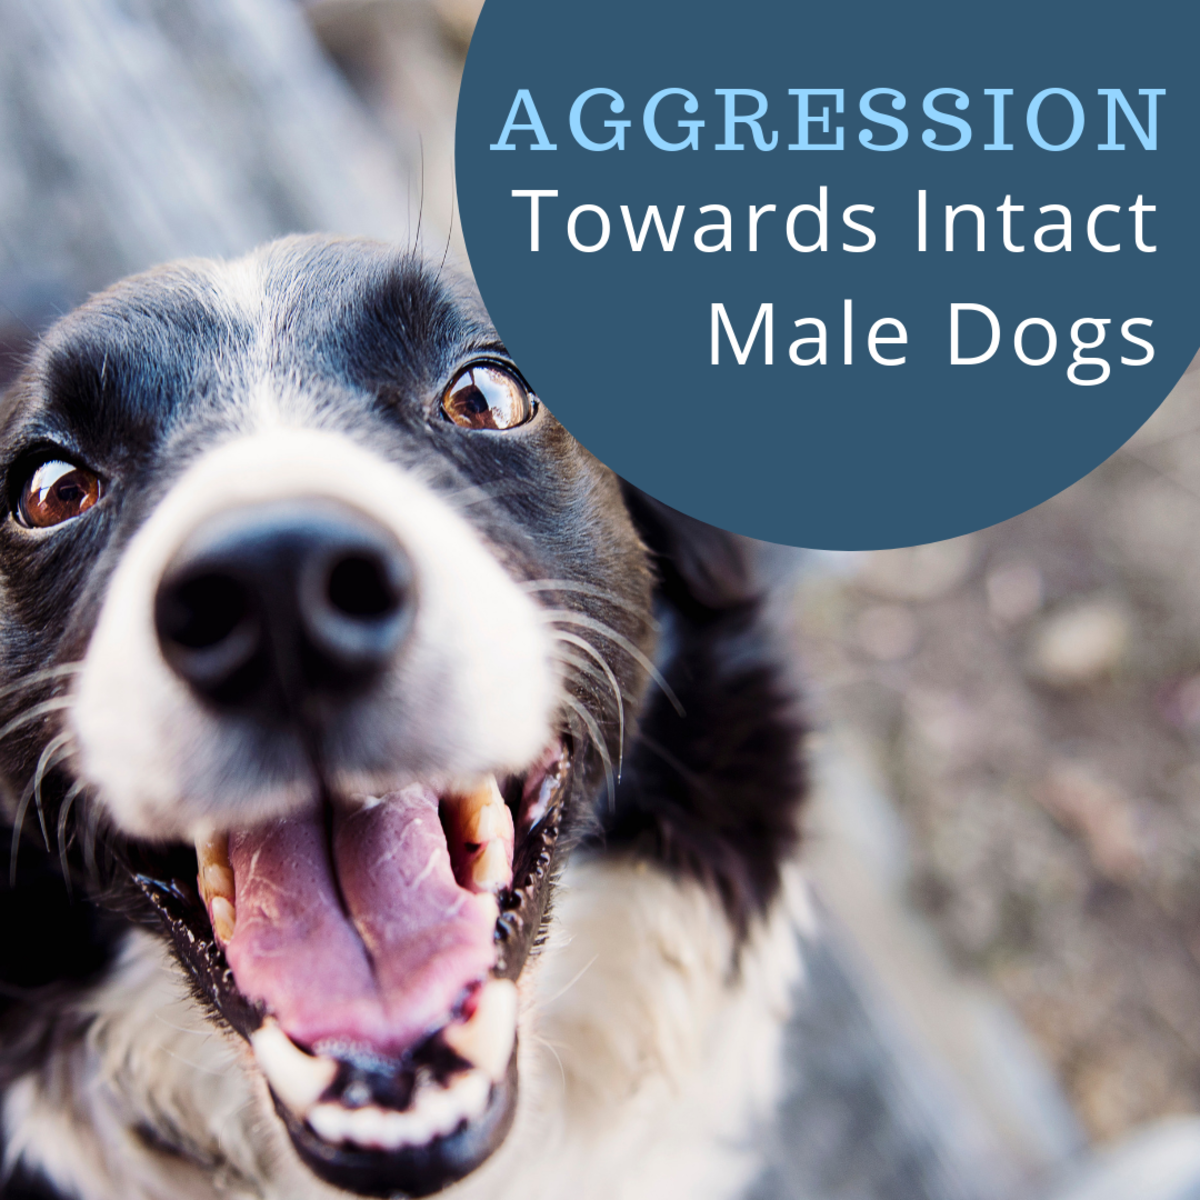 Why Is My Dog Aggressive Towards Intact Males? PetHelpful